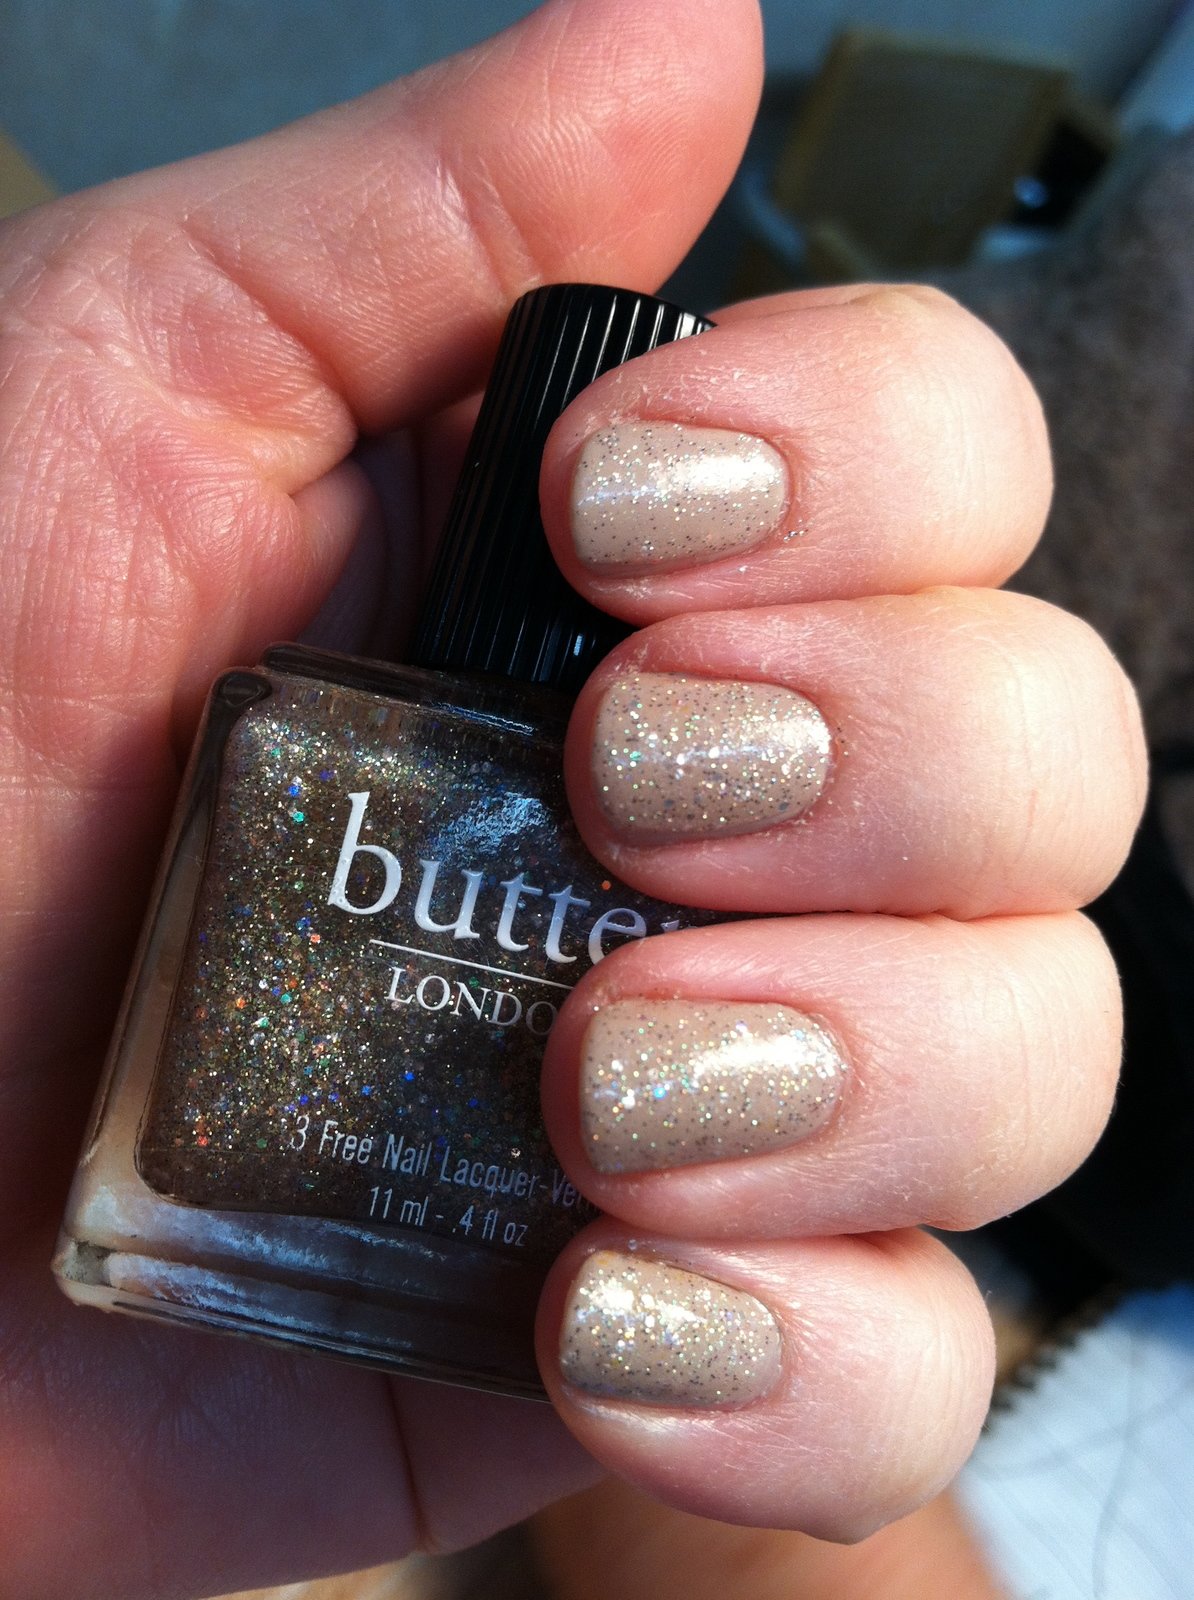 Butter London 3 Free Nail Lacquer Chancer Ingredients and Reviews